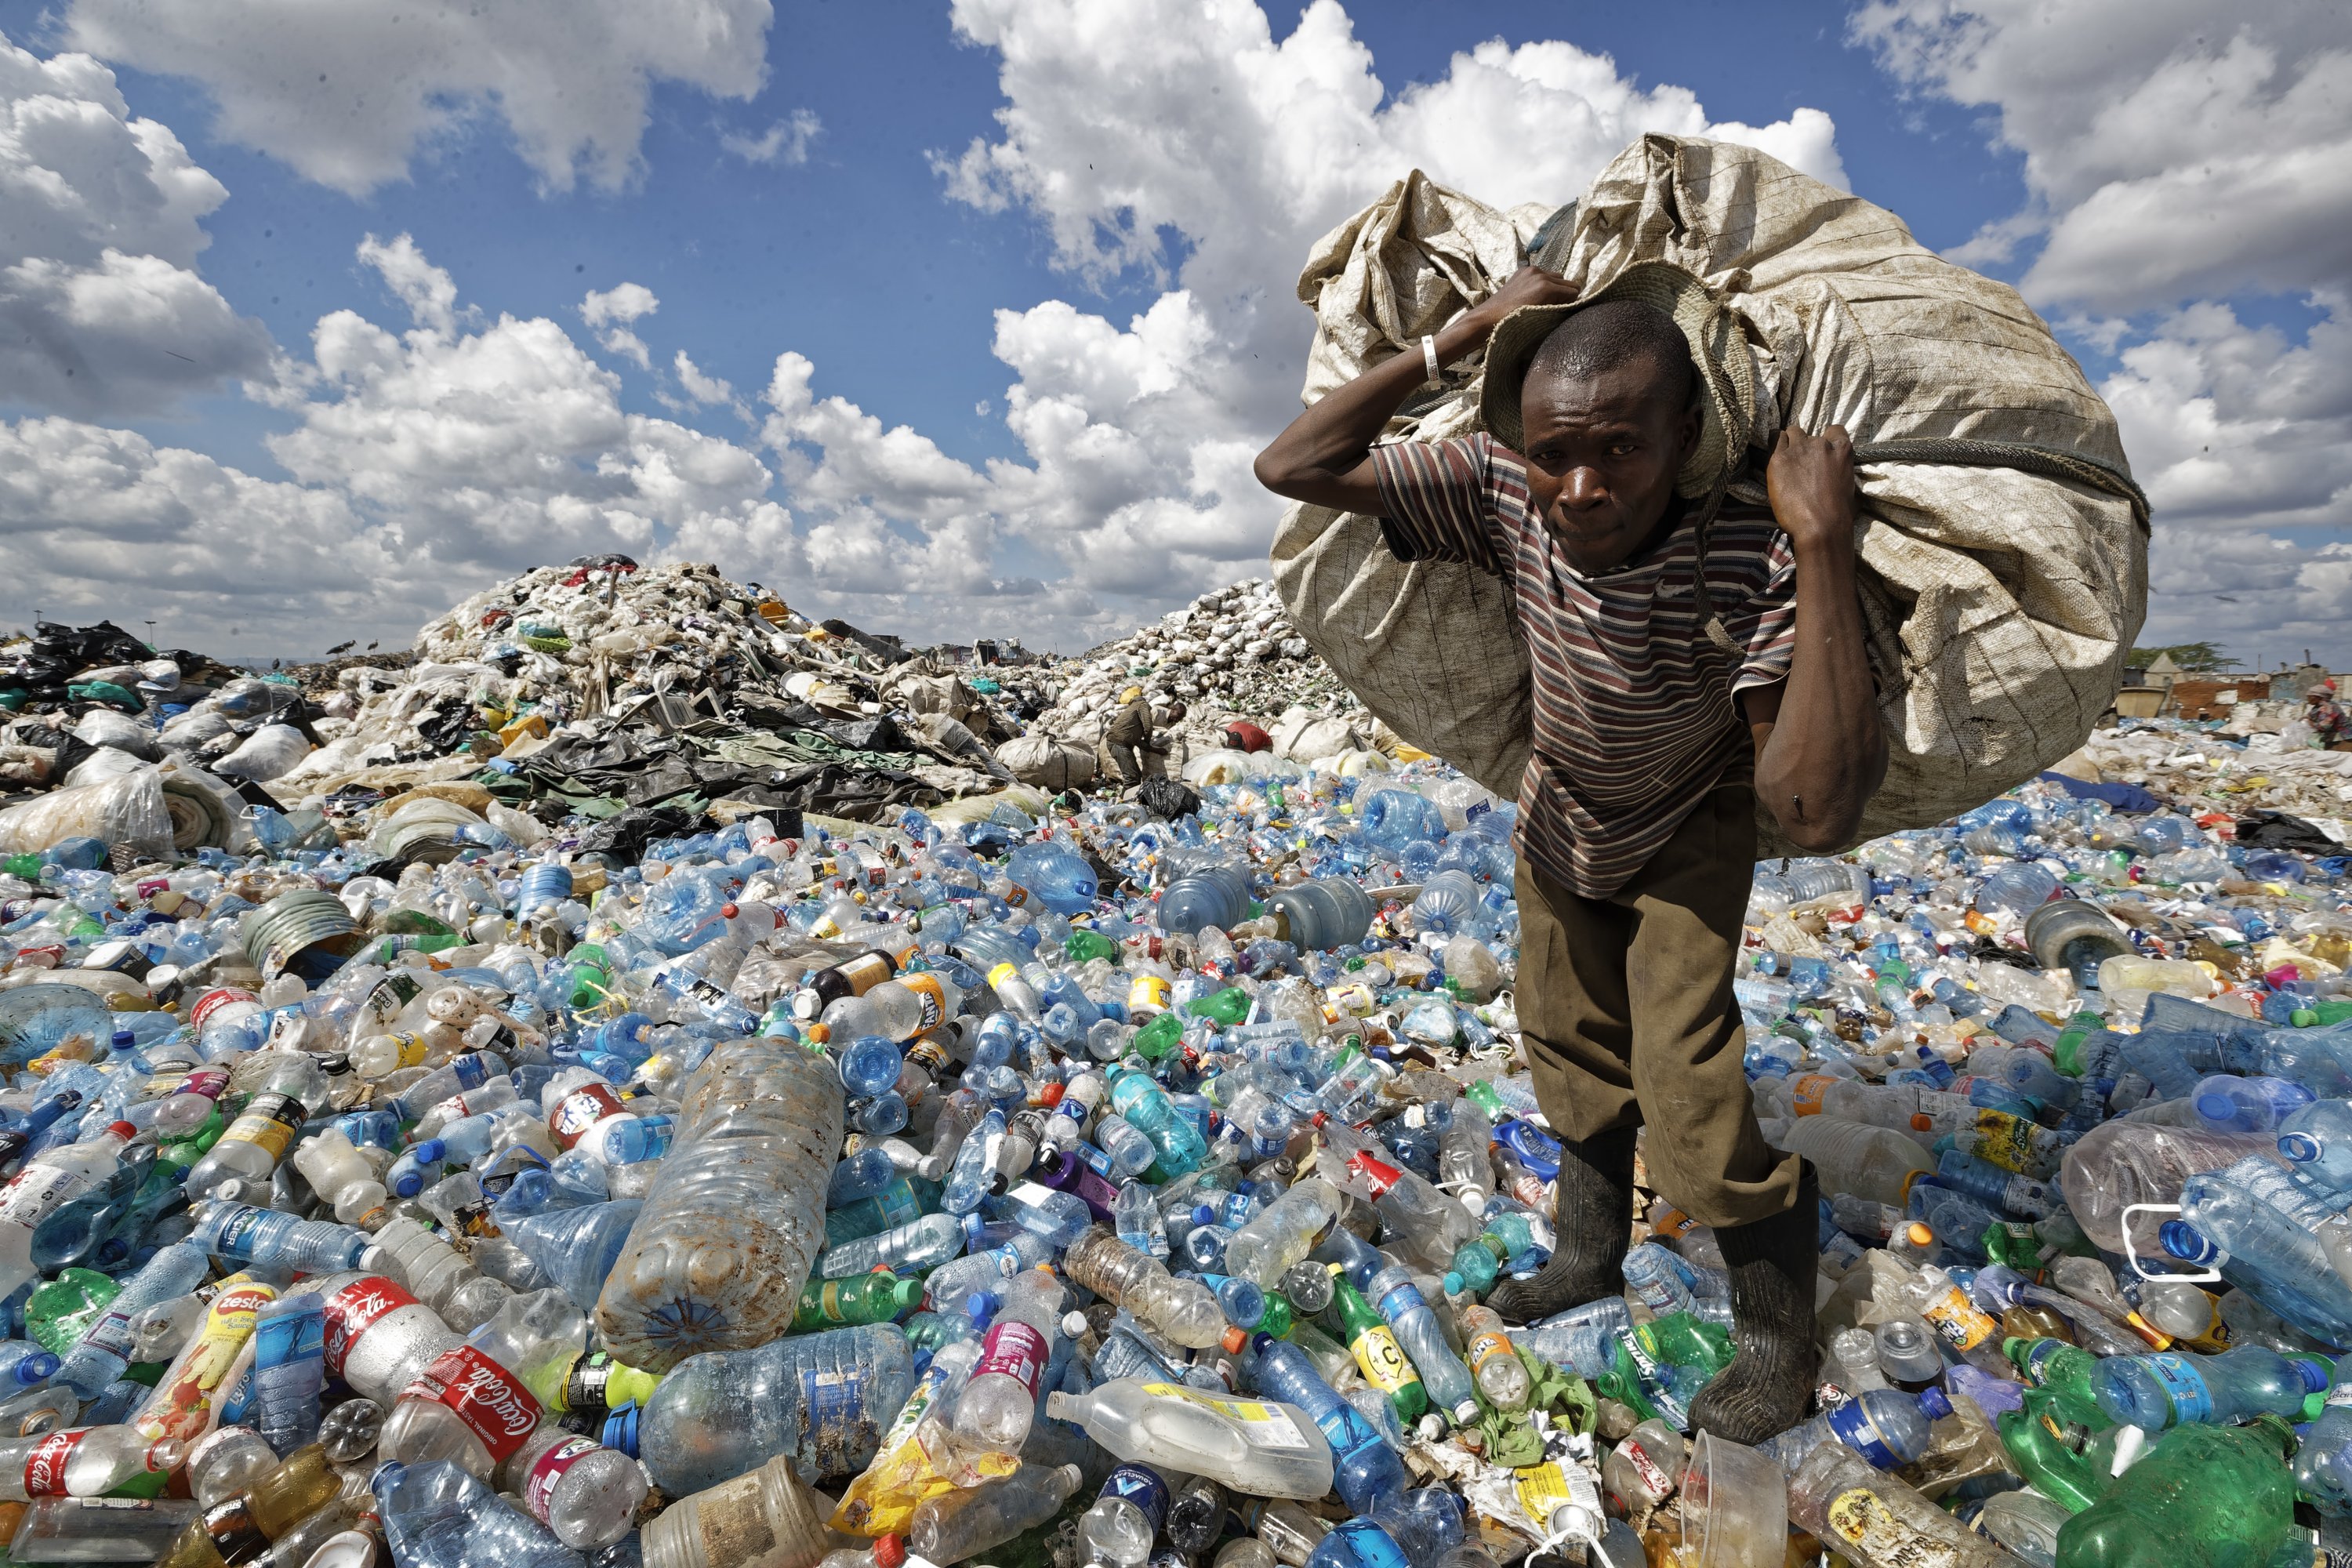 UN's new task: Save Africa from becoming world's plastic 'dustbin